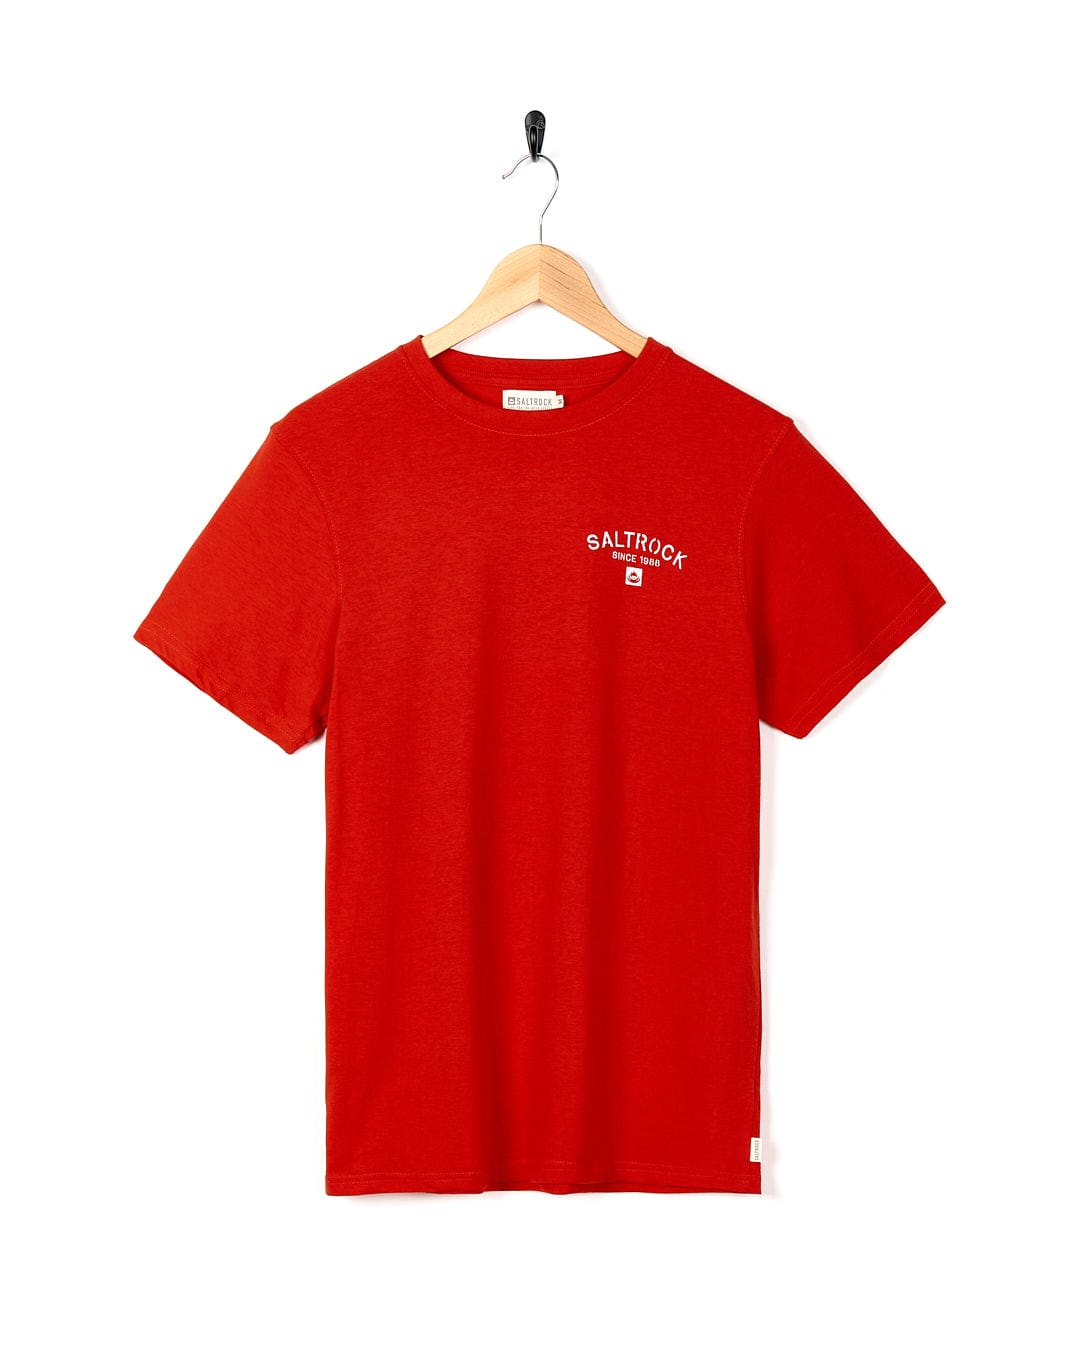 A Stencil - Mens Fowey Location T-Shirt - Red from Saltrock with a white logo on it.